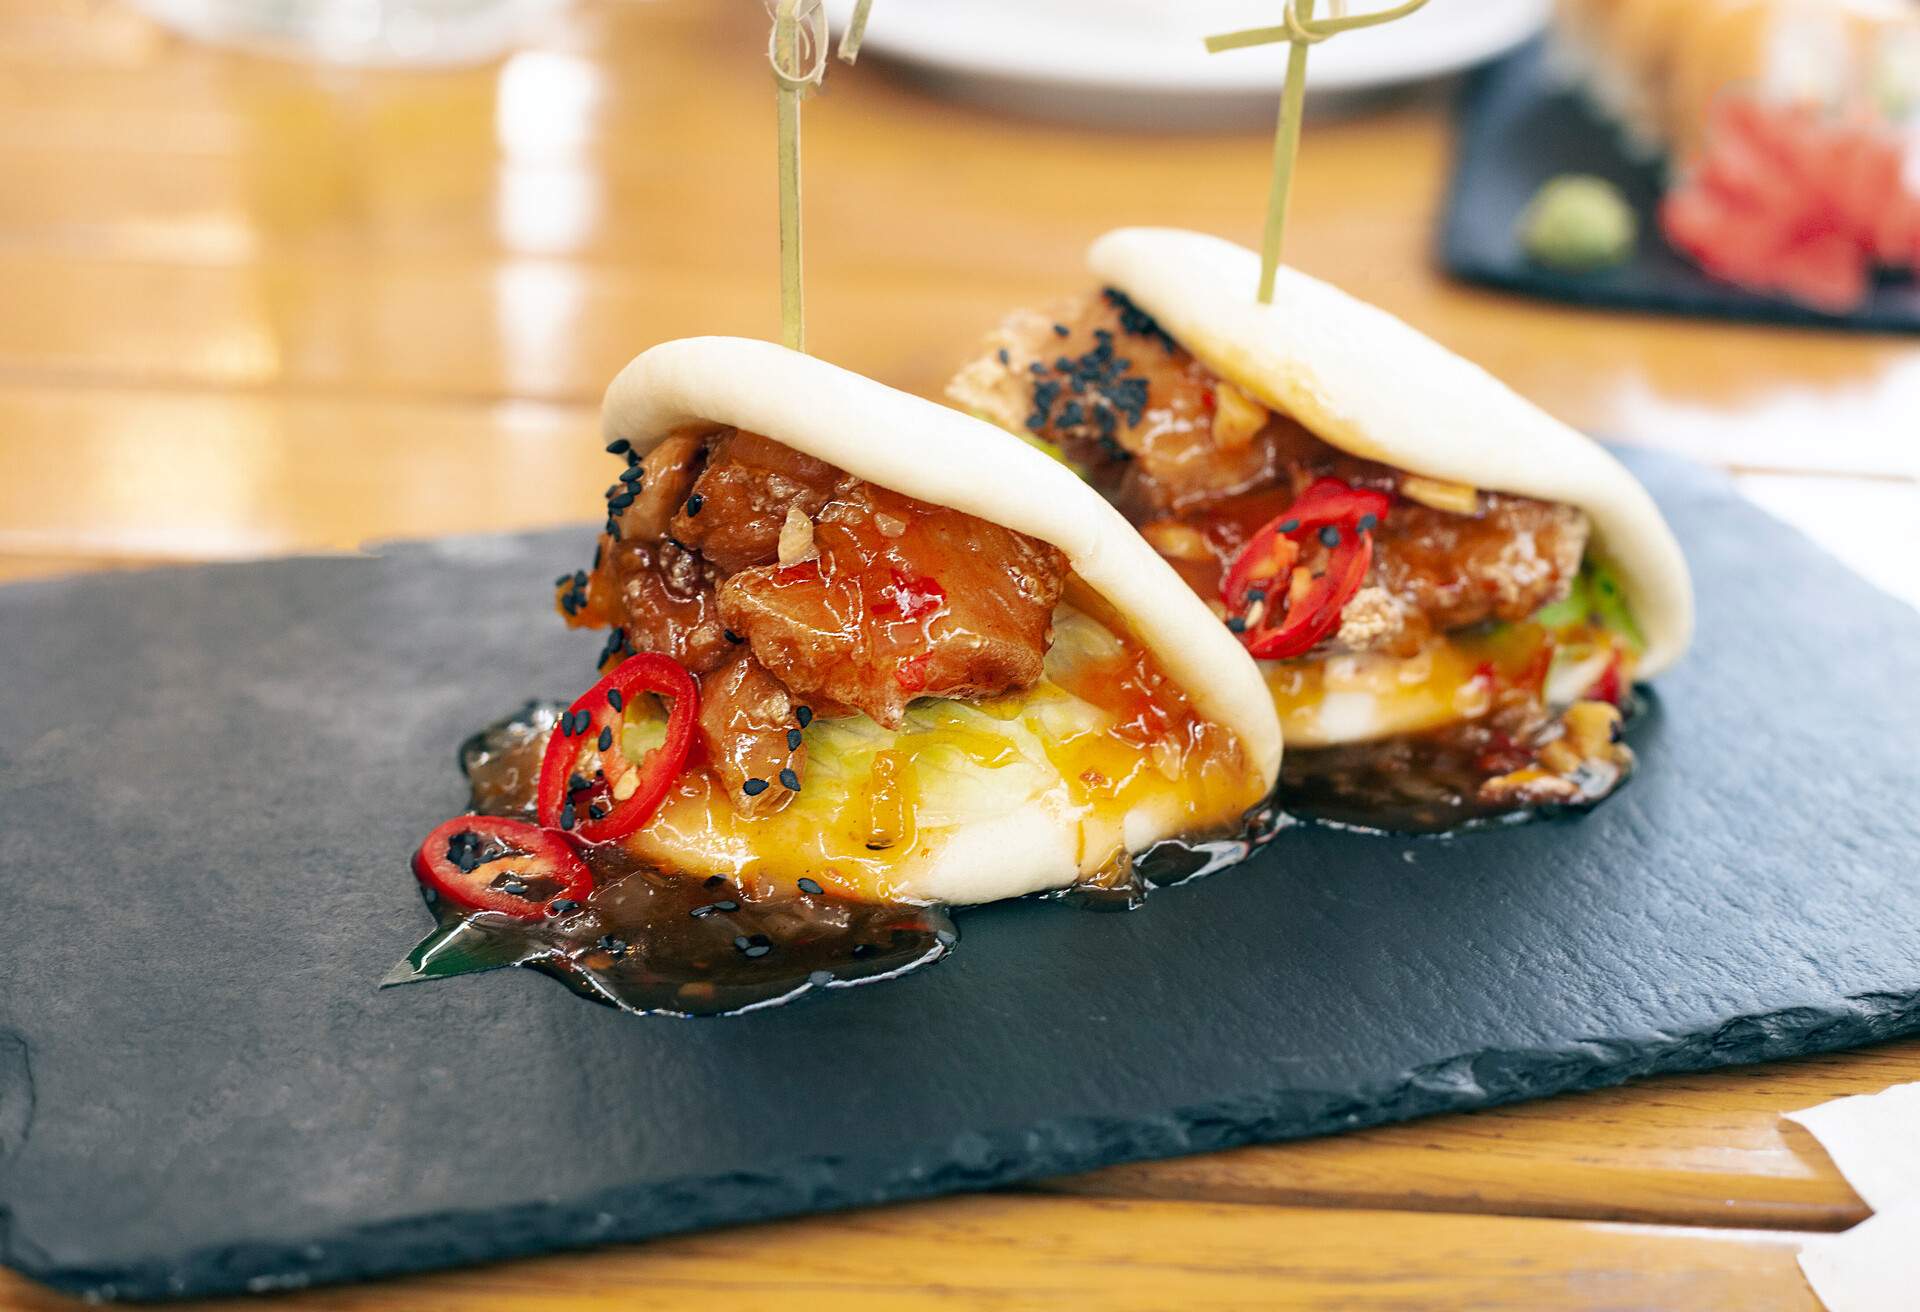 Asian traditional meal: bao with chicken and chili pepper on restaurant table